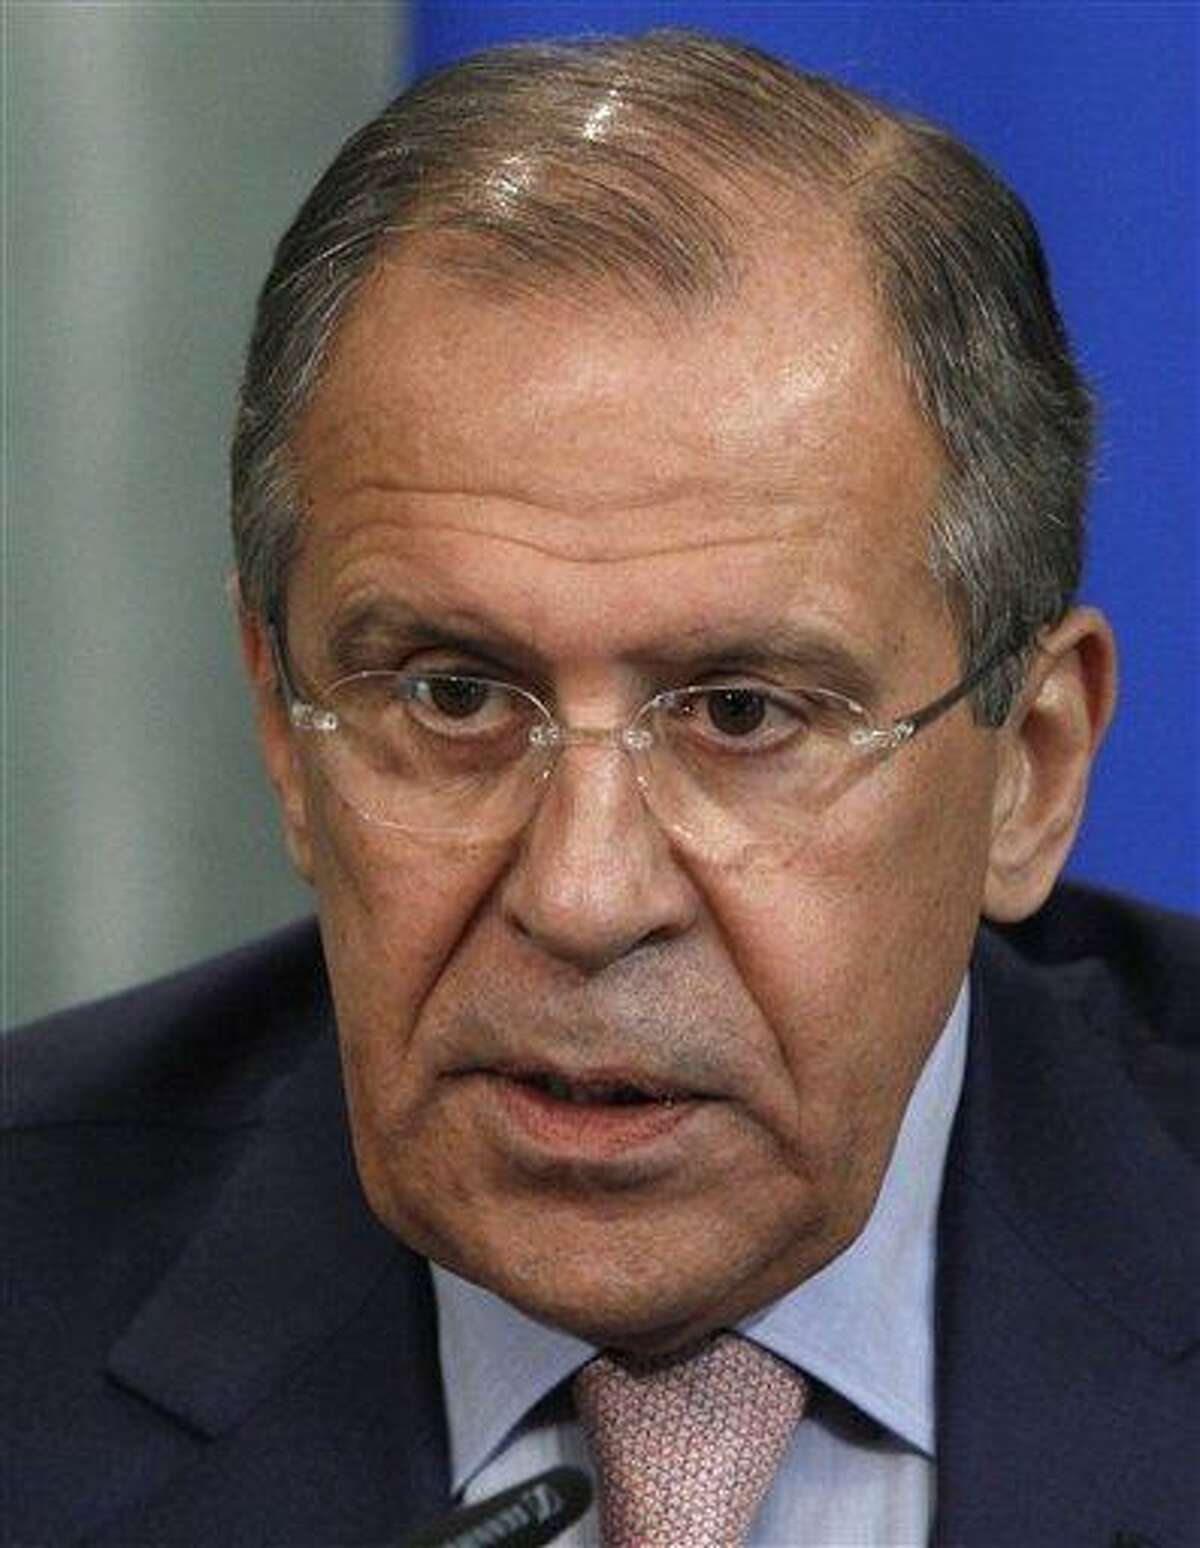 Russia's Foreign Minister Sergey Lavrov speaks at a news conference in Moscow on Tuesday, June 25, 2013. Lavrov on Tuesday bluntly rejected U.S. demands to extradite National Security Agency leaker Edward Snowden, saying that Snowden hasn't crossed the Russian border as he seeks to evade prosecution. Sergey Lavrov insisted that Russia has nothing to do with Snowden or his travel plans. Lavrov wouldn't say where Snowden is, but he angrily lashed out at the U.S. for demanding his extradition and warnings of negative consequences if Moscow fails to comply. (AP Photo/Ivan Sekretarev)